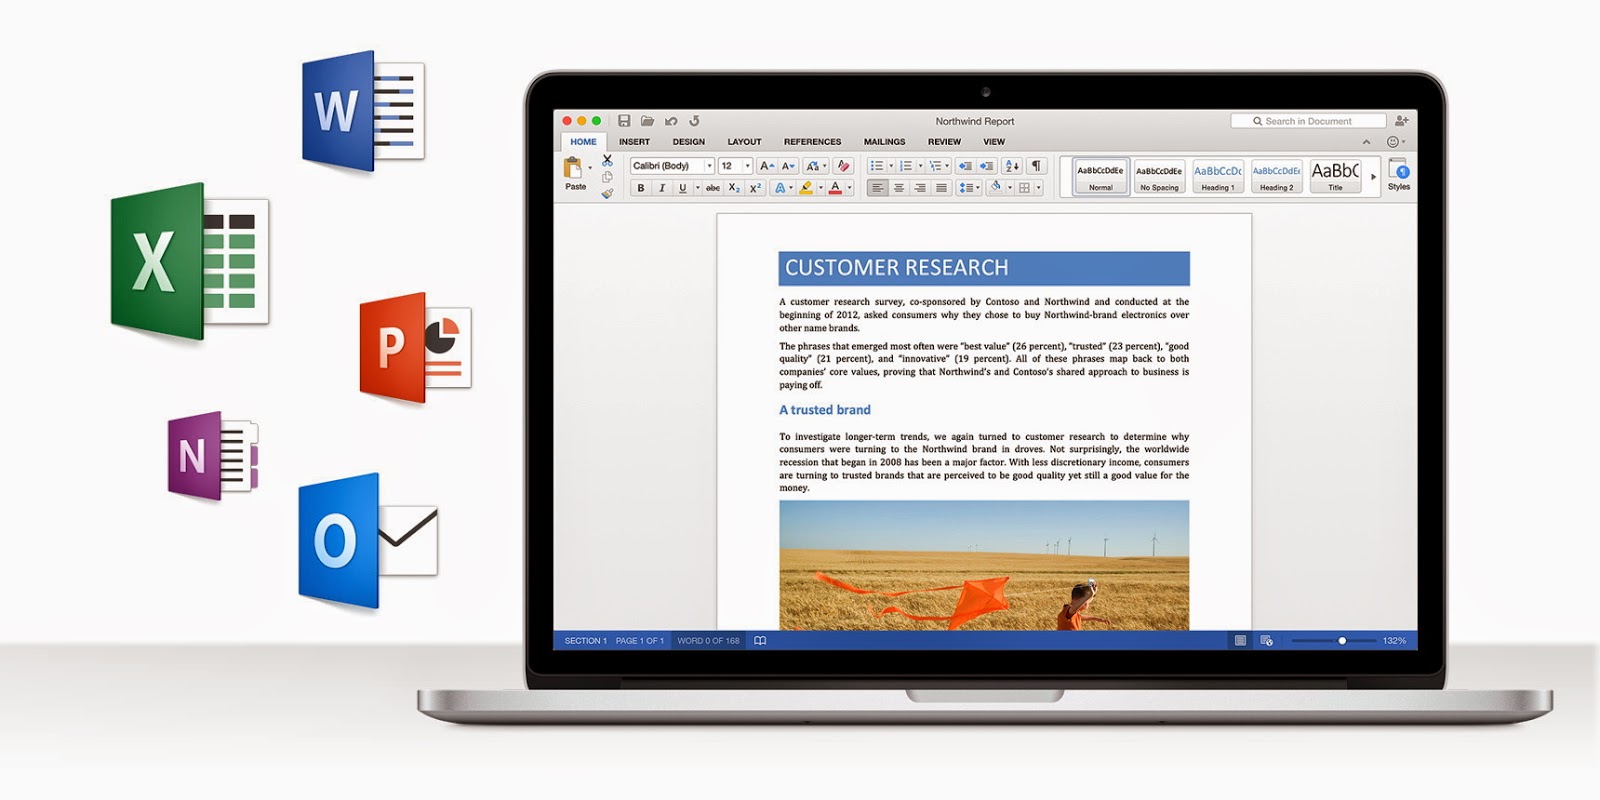 Microsoft Office Suite For Mac Free Download